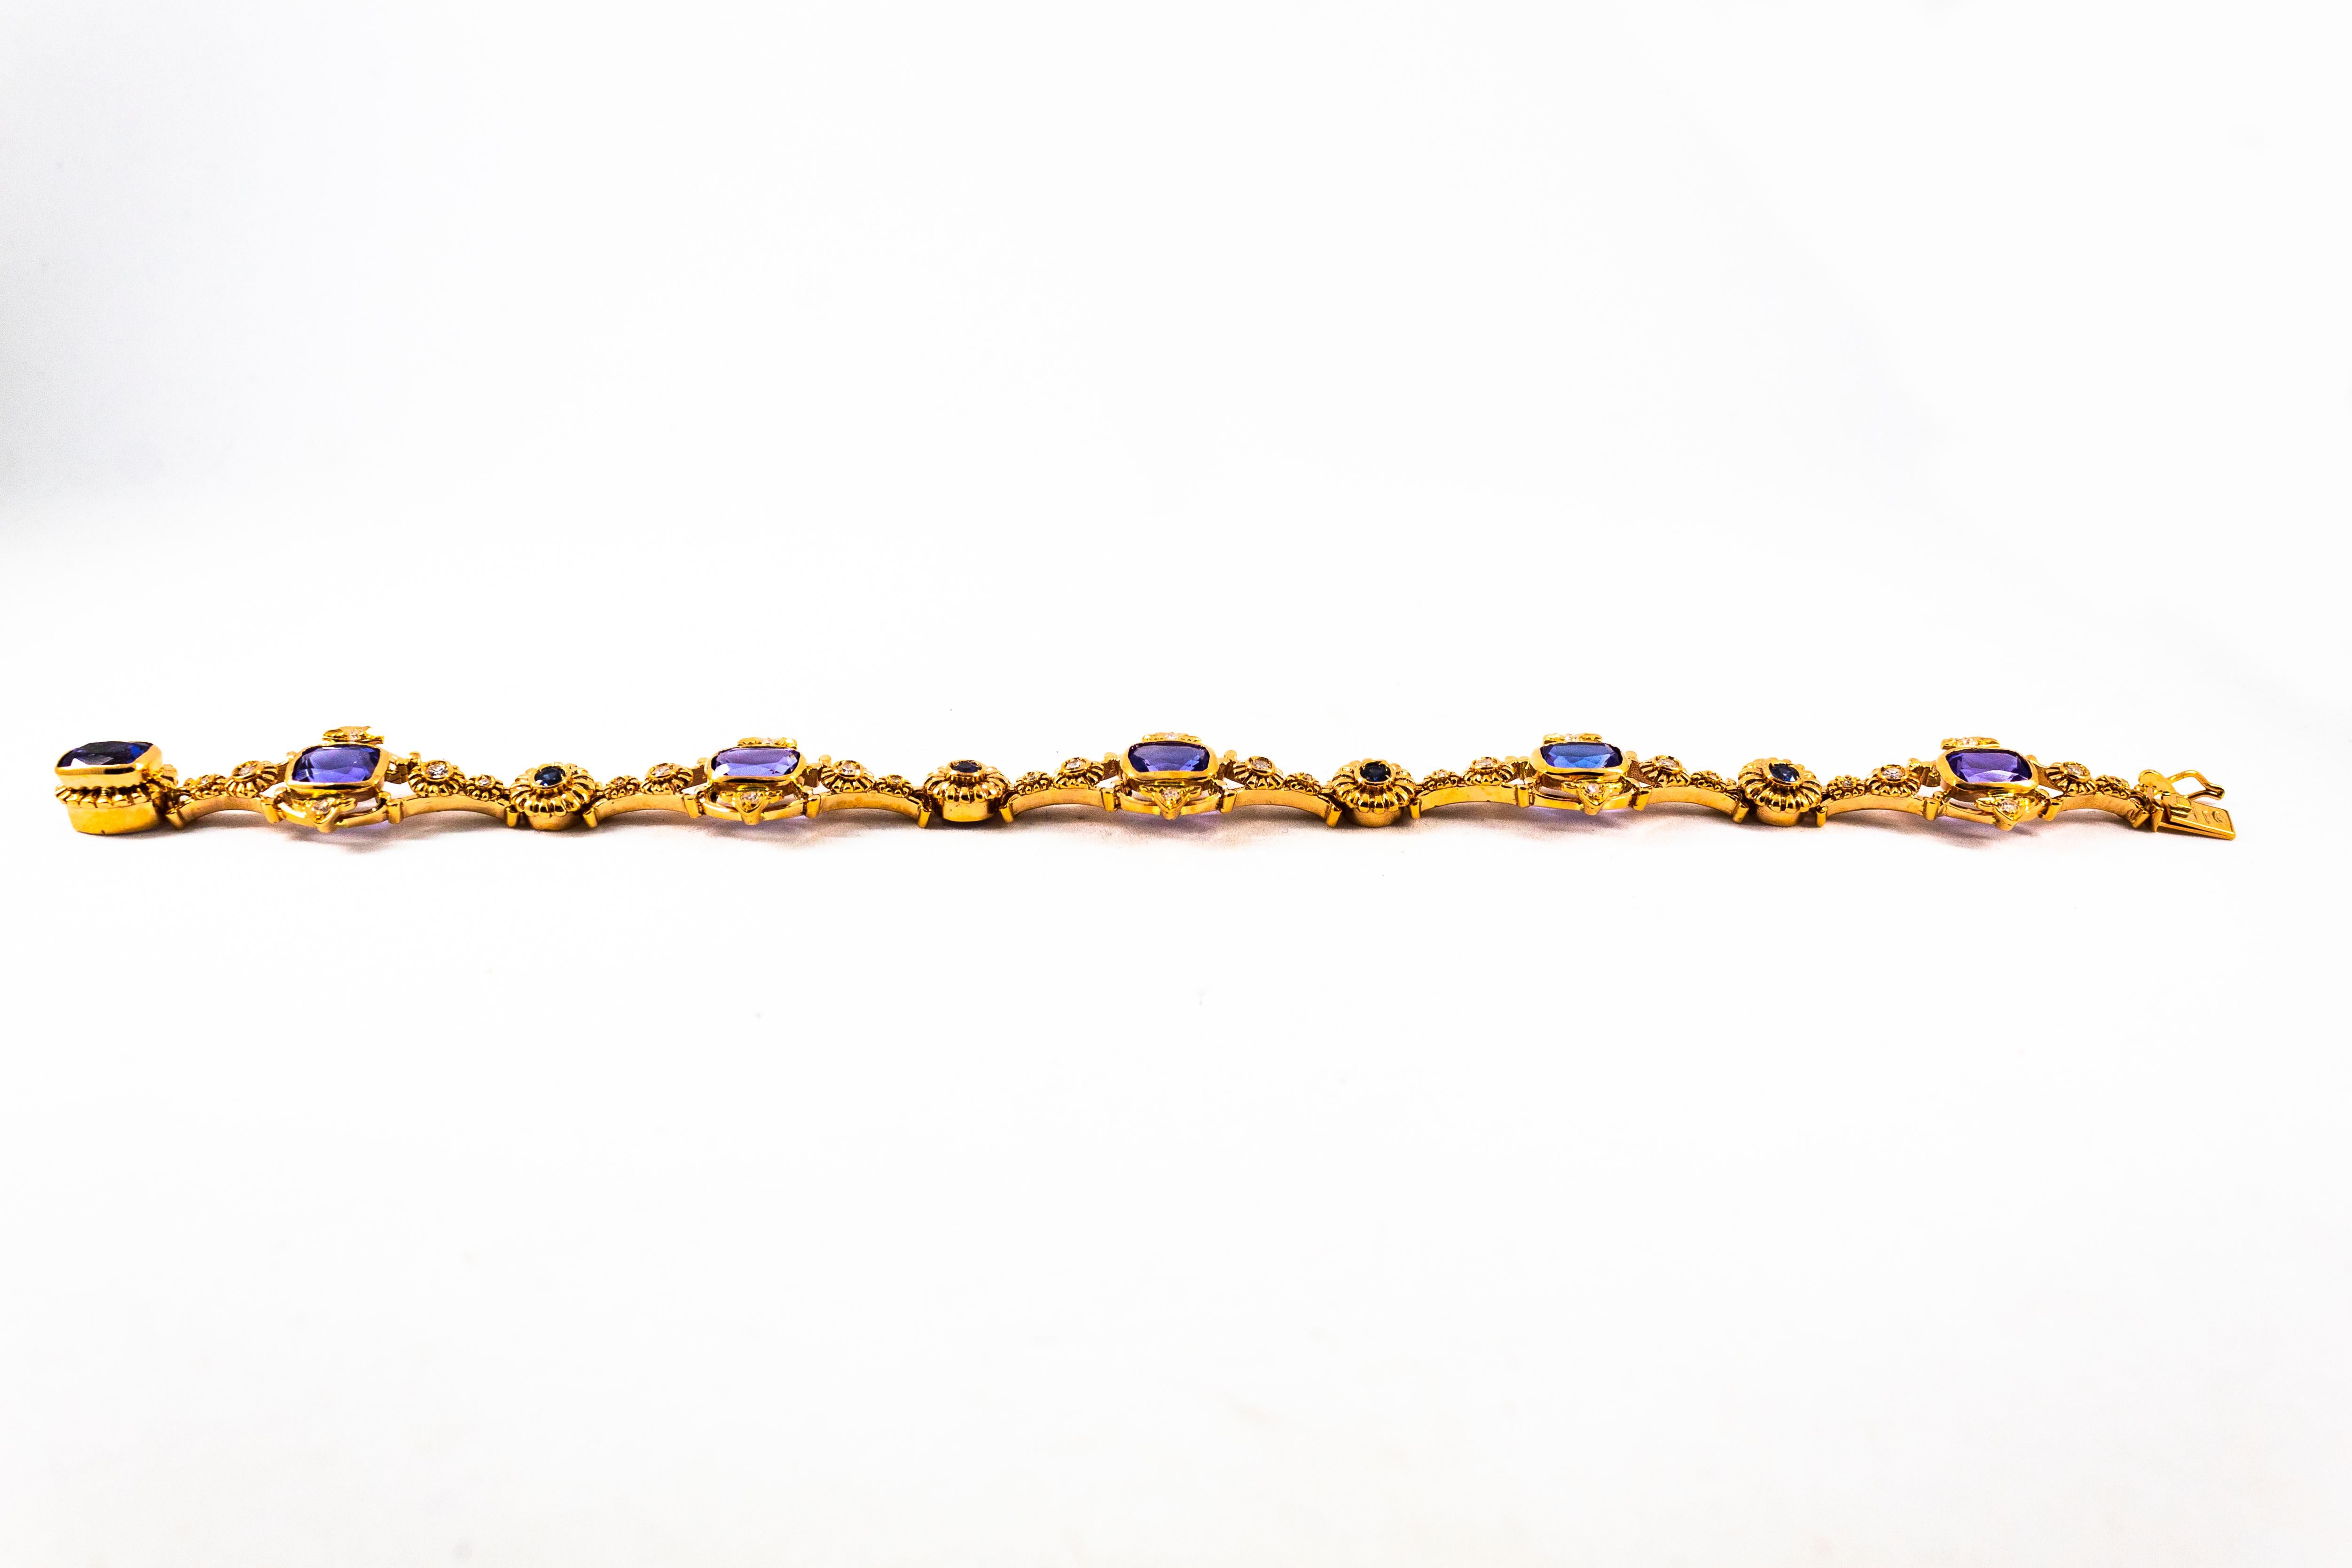 This Bracelet is made of 14K Yellow Gold.
This Bracelet has 0.60 Carats of White Modern Round Cut Diamonds.
This Bracelet has 0.30 Carats of Blue Sapphires.
This Bracelet has 6.00 Carats of Natural Tanzanite.
This Bracelet is available also with